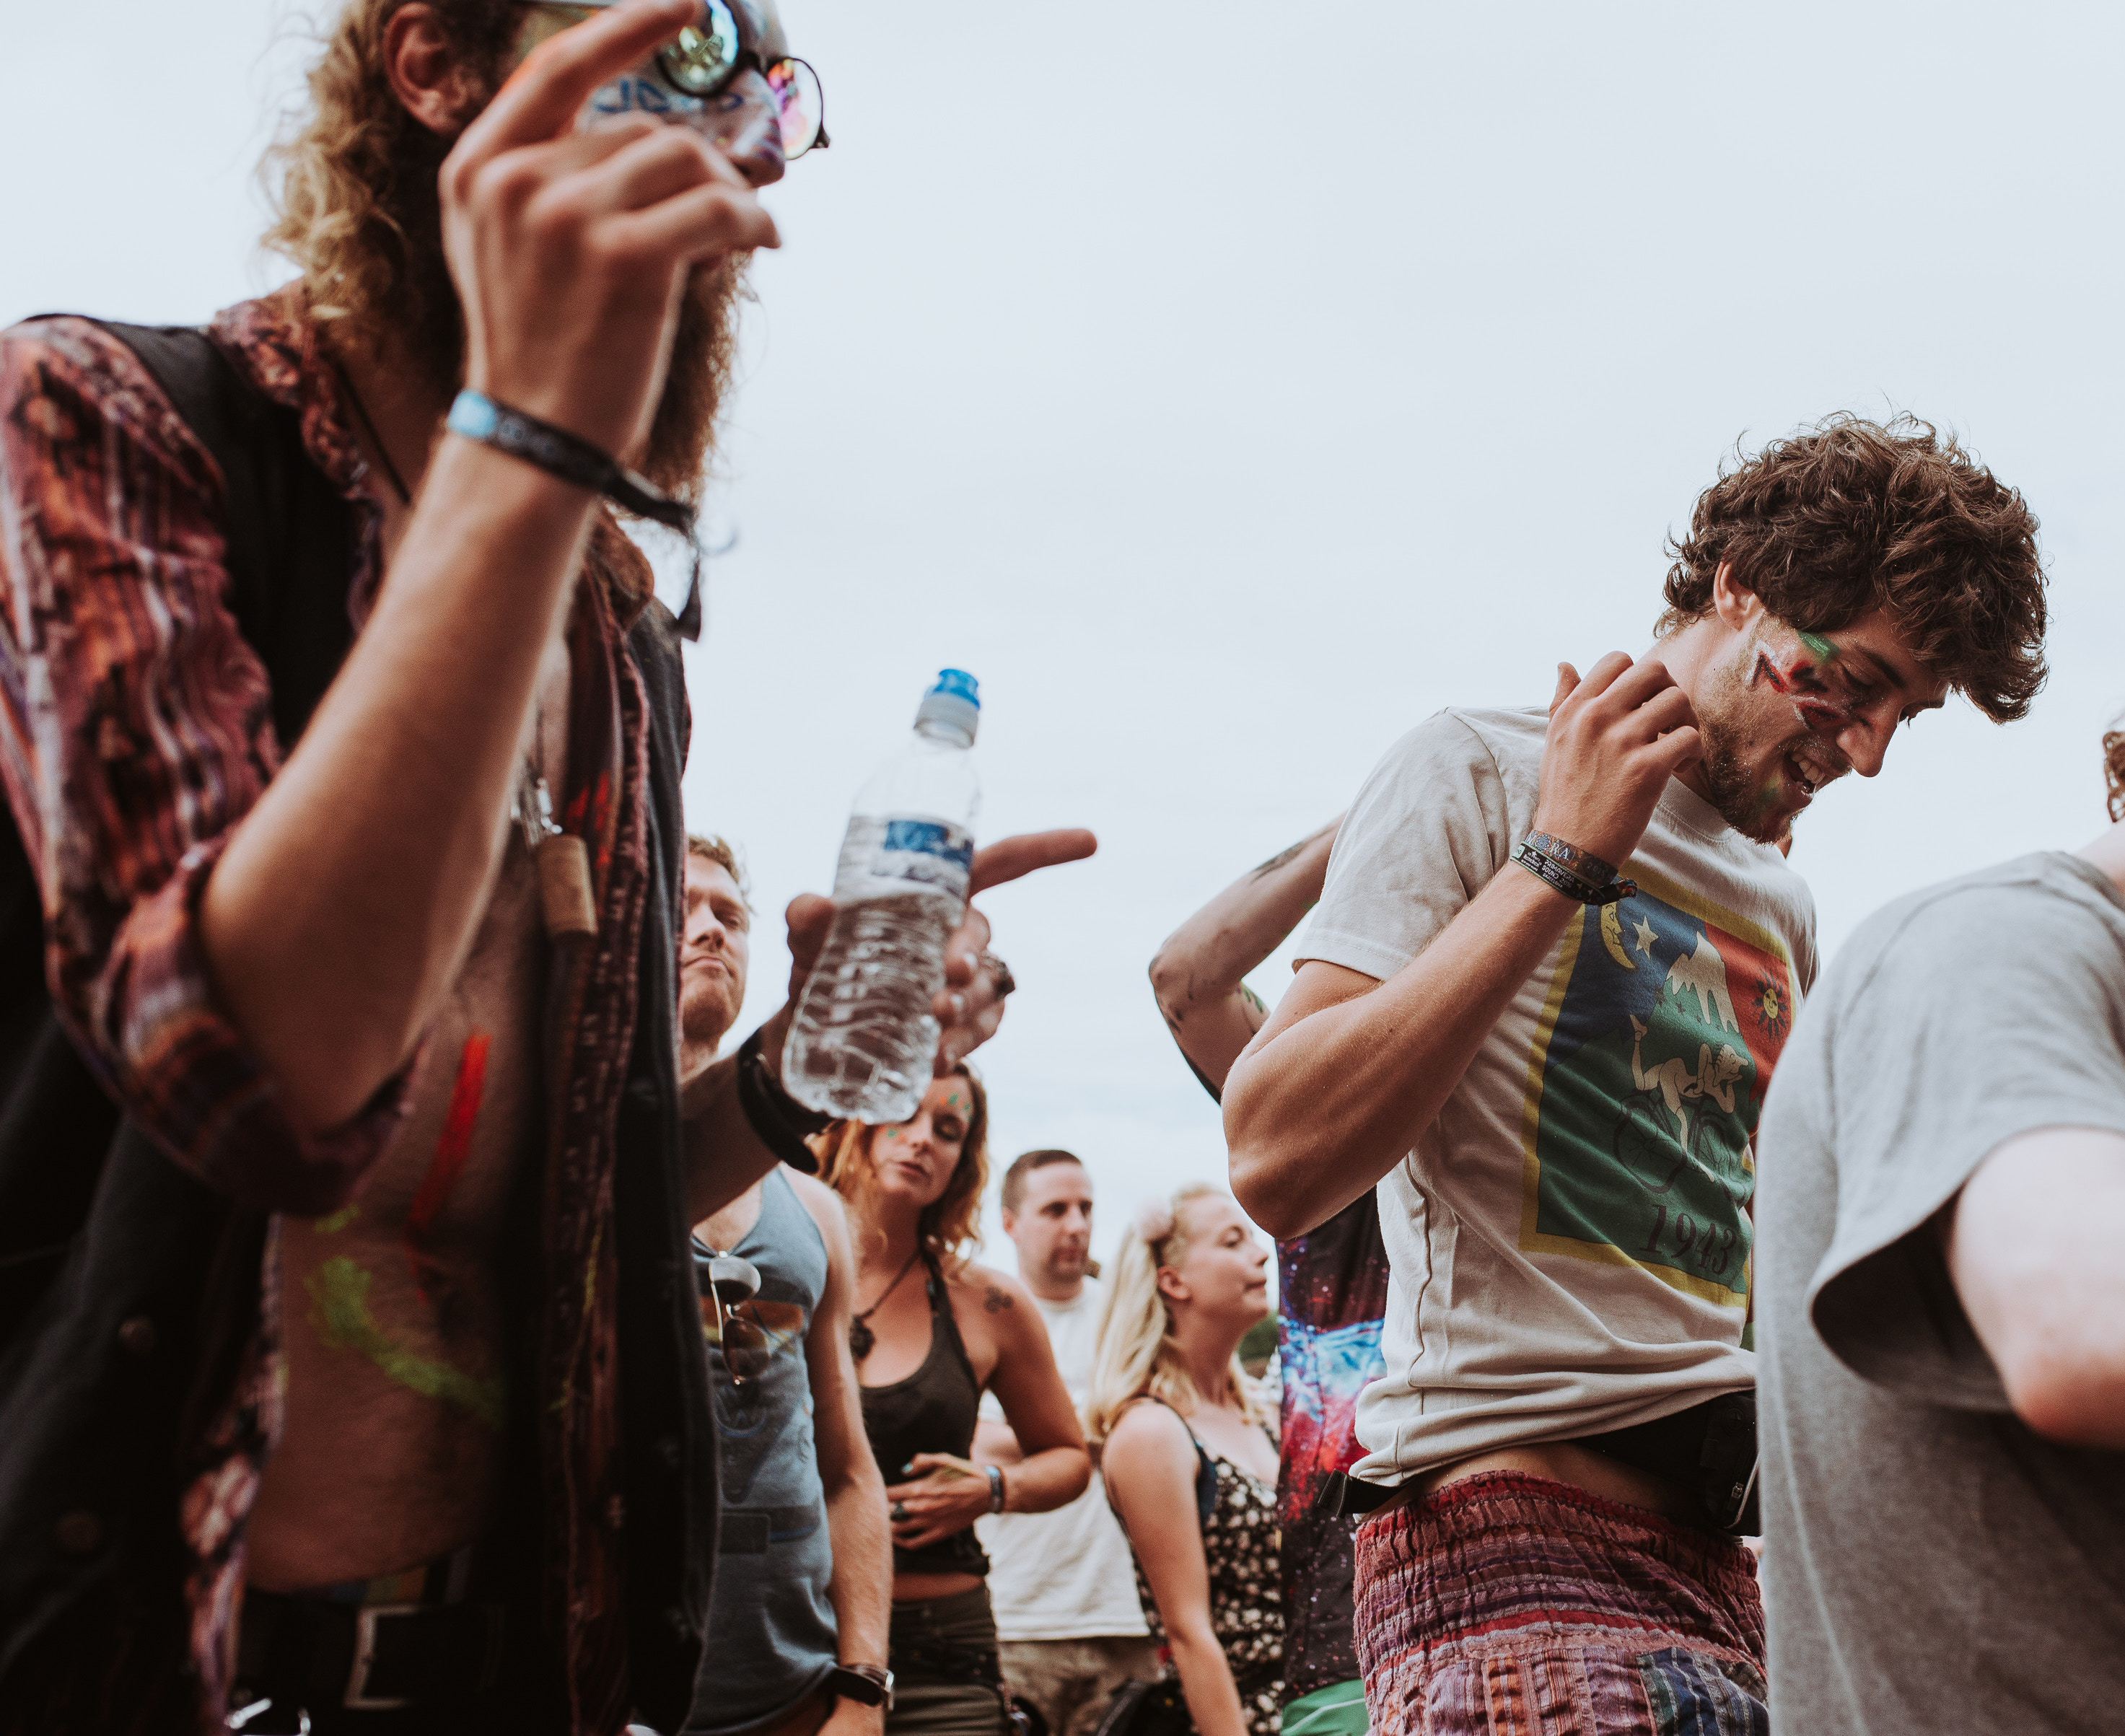 Festival-goers dancing to live music and drinking water. How to survive a music festival tip 2: stay hydrated!